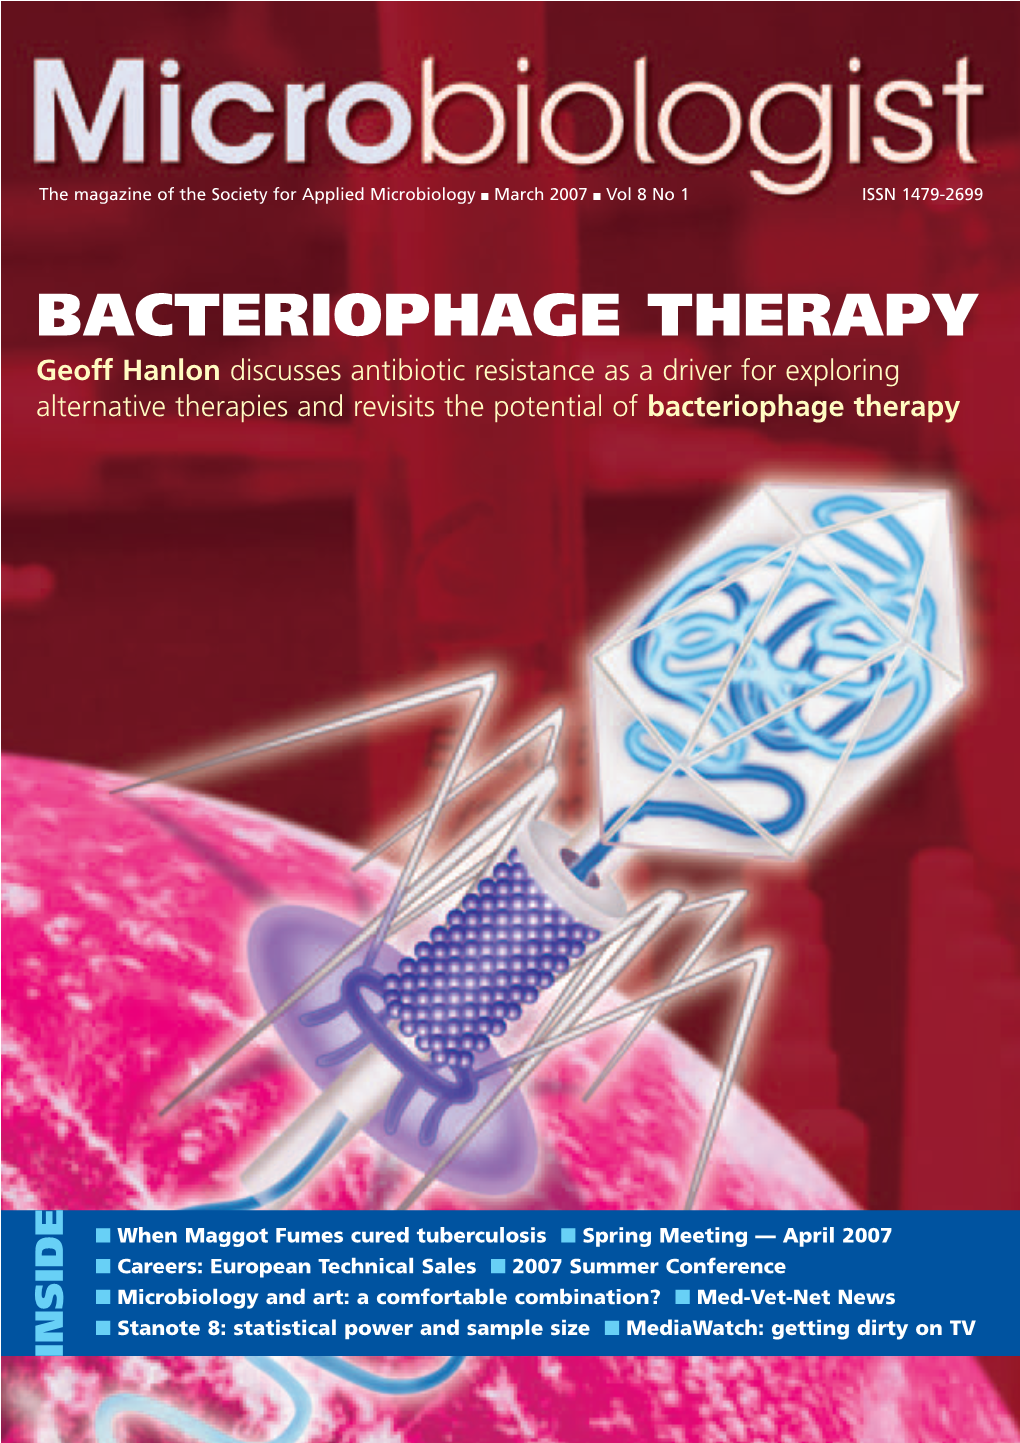 BACTERIOPHAGE THERAPY Geoff Hanlon Discusses Antibiotic Resistance As a Driver for Exploring Alternative Therapies and Revisits the Potential of Bacteriophage Therapy